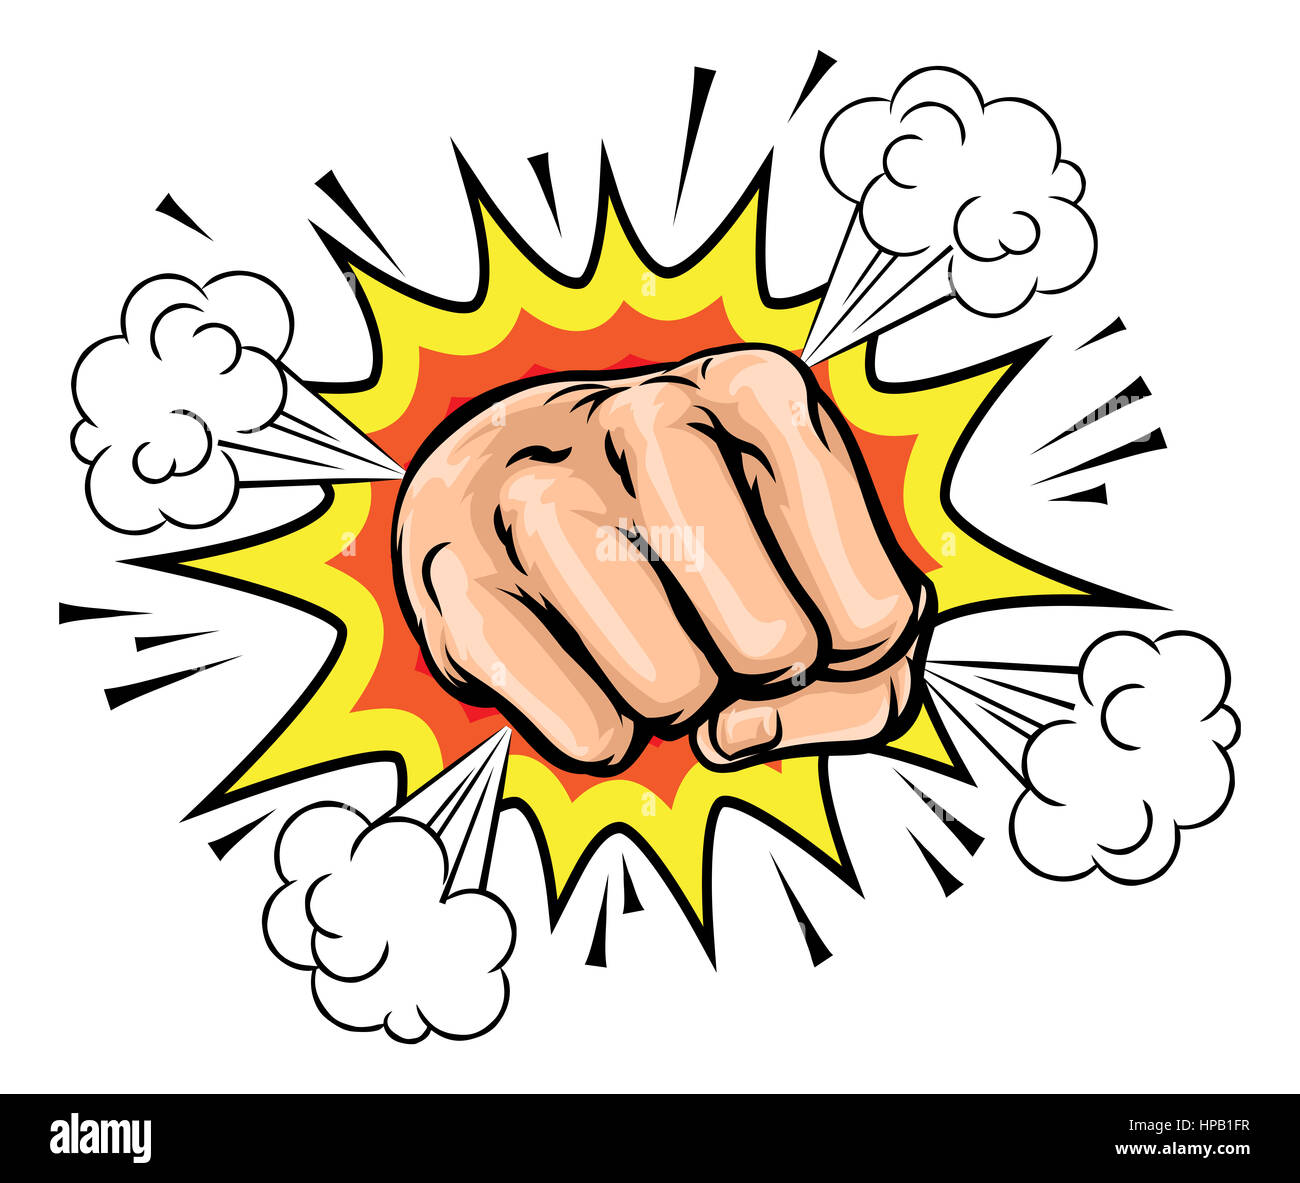 Cartoon fist hand with a comic book explosion Stock Photo